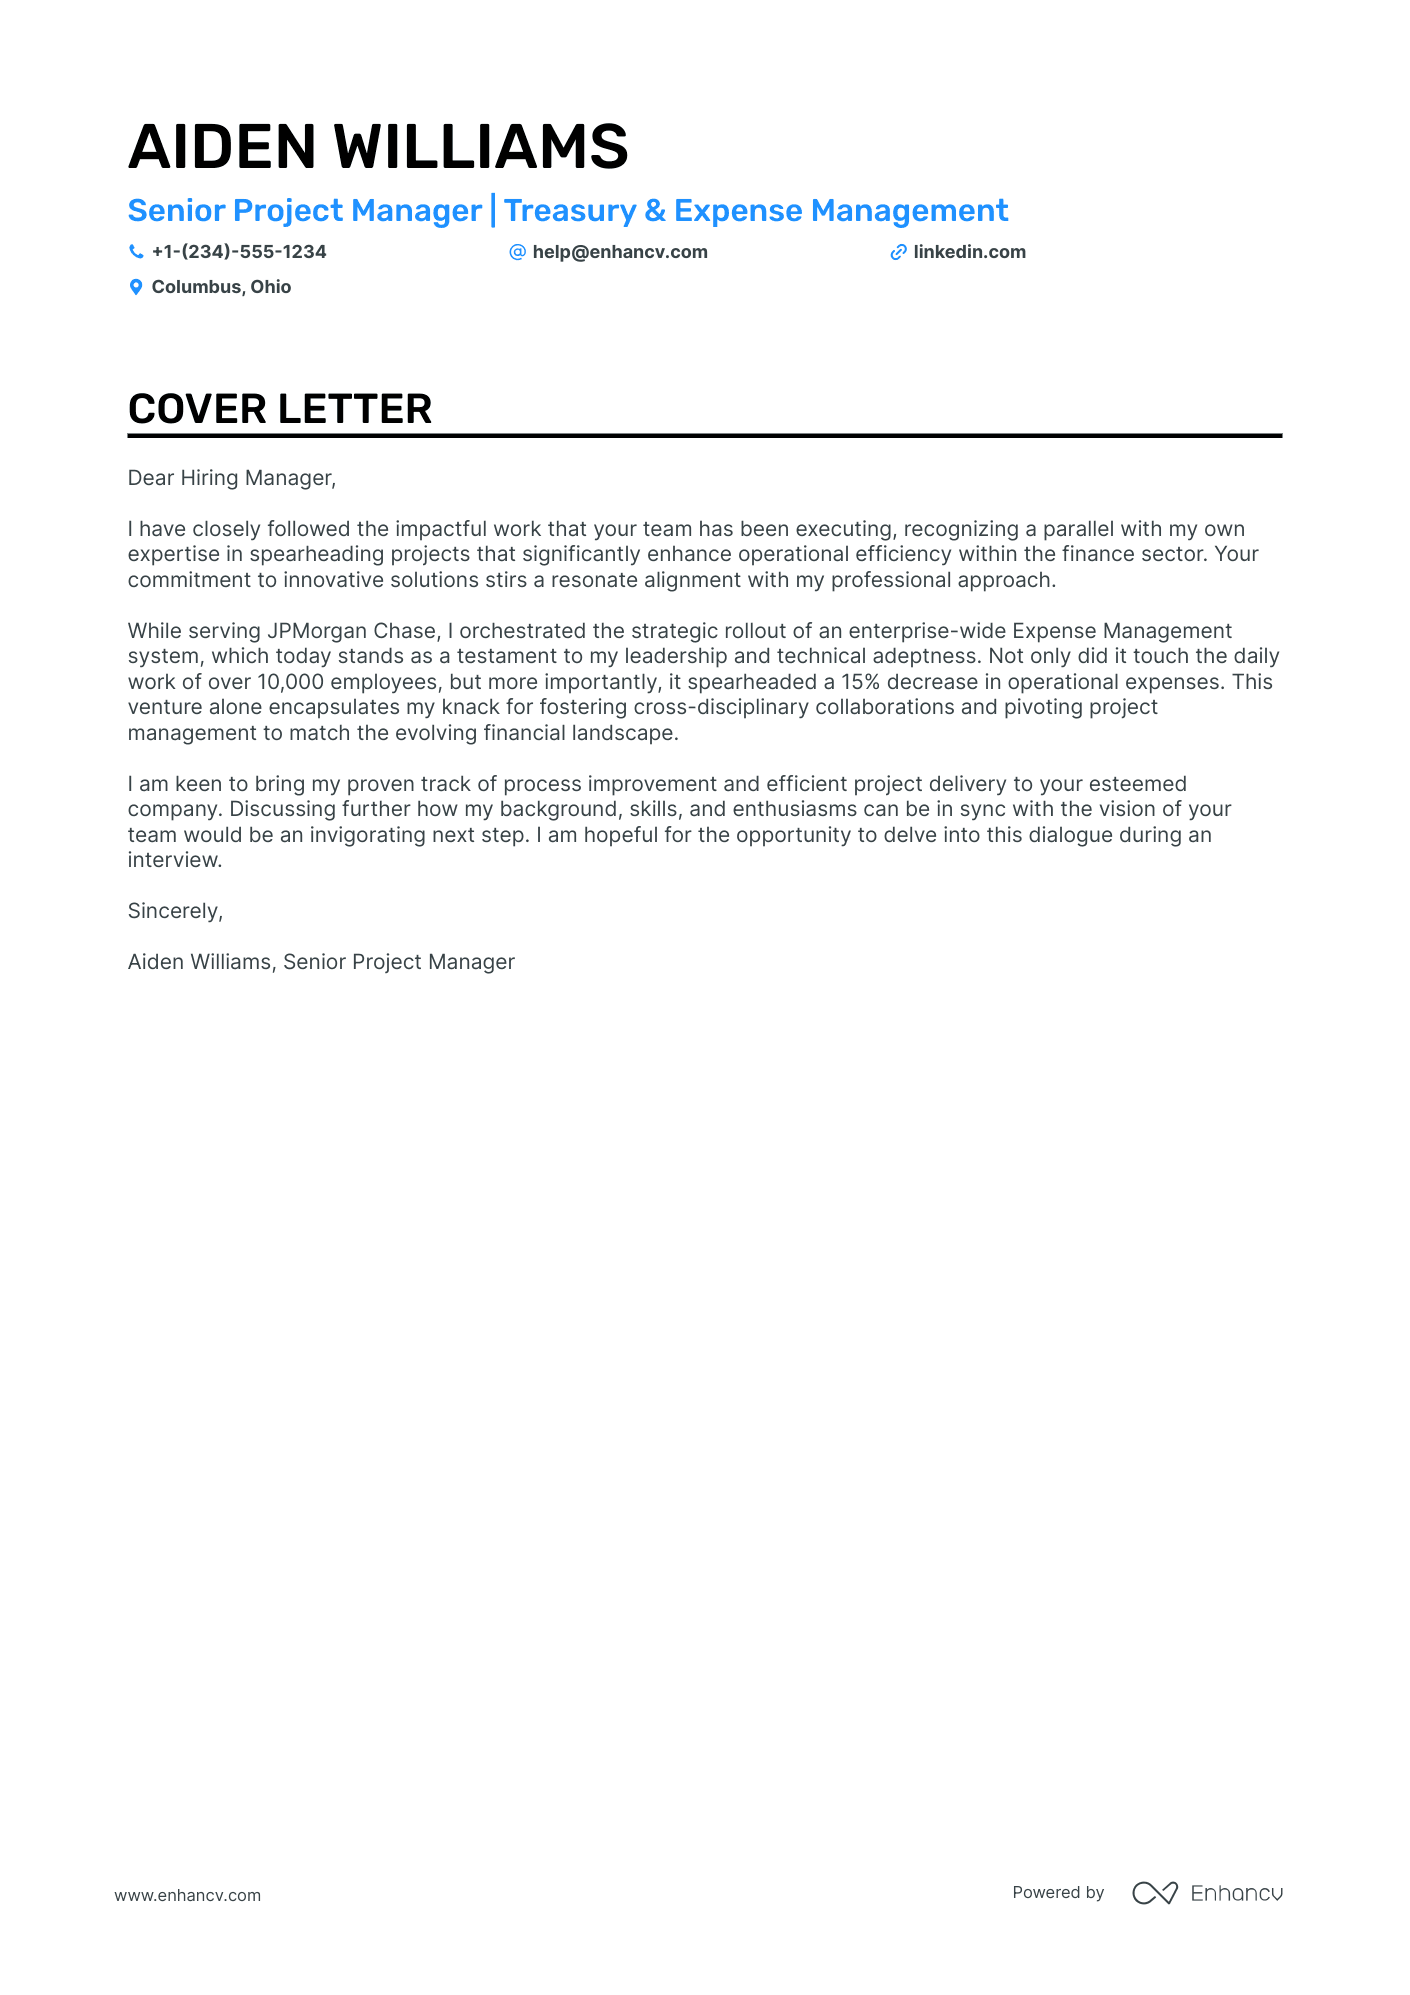 Business Project Manager cover letter